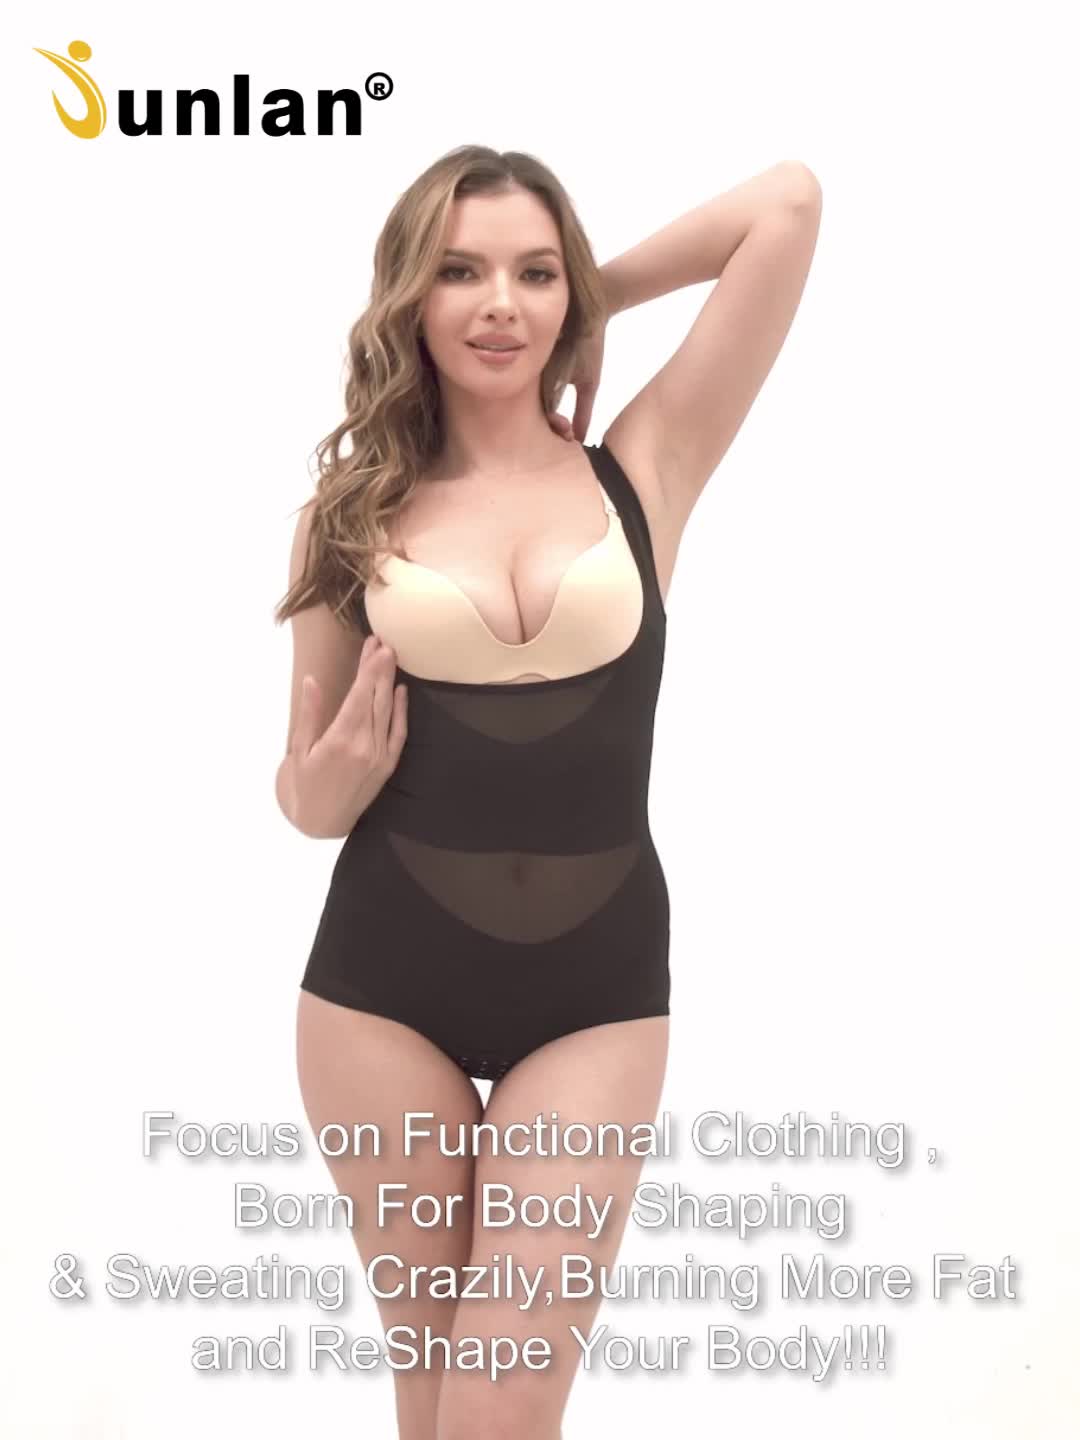 My GO-TO Shapewear for AMAZING cleavage and tummy control